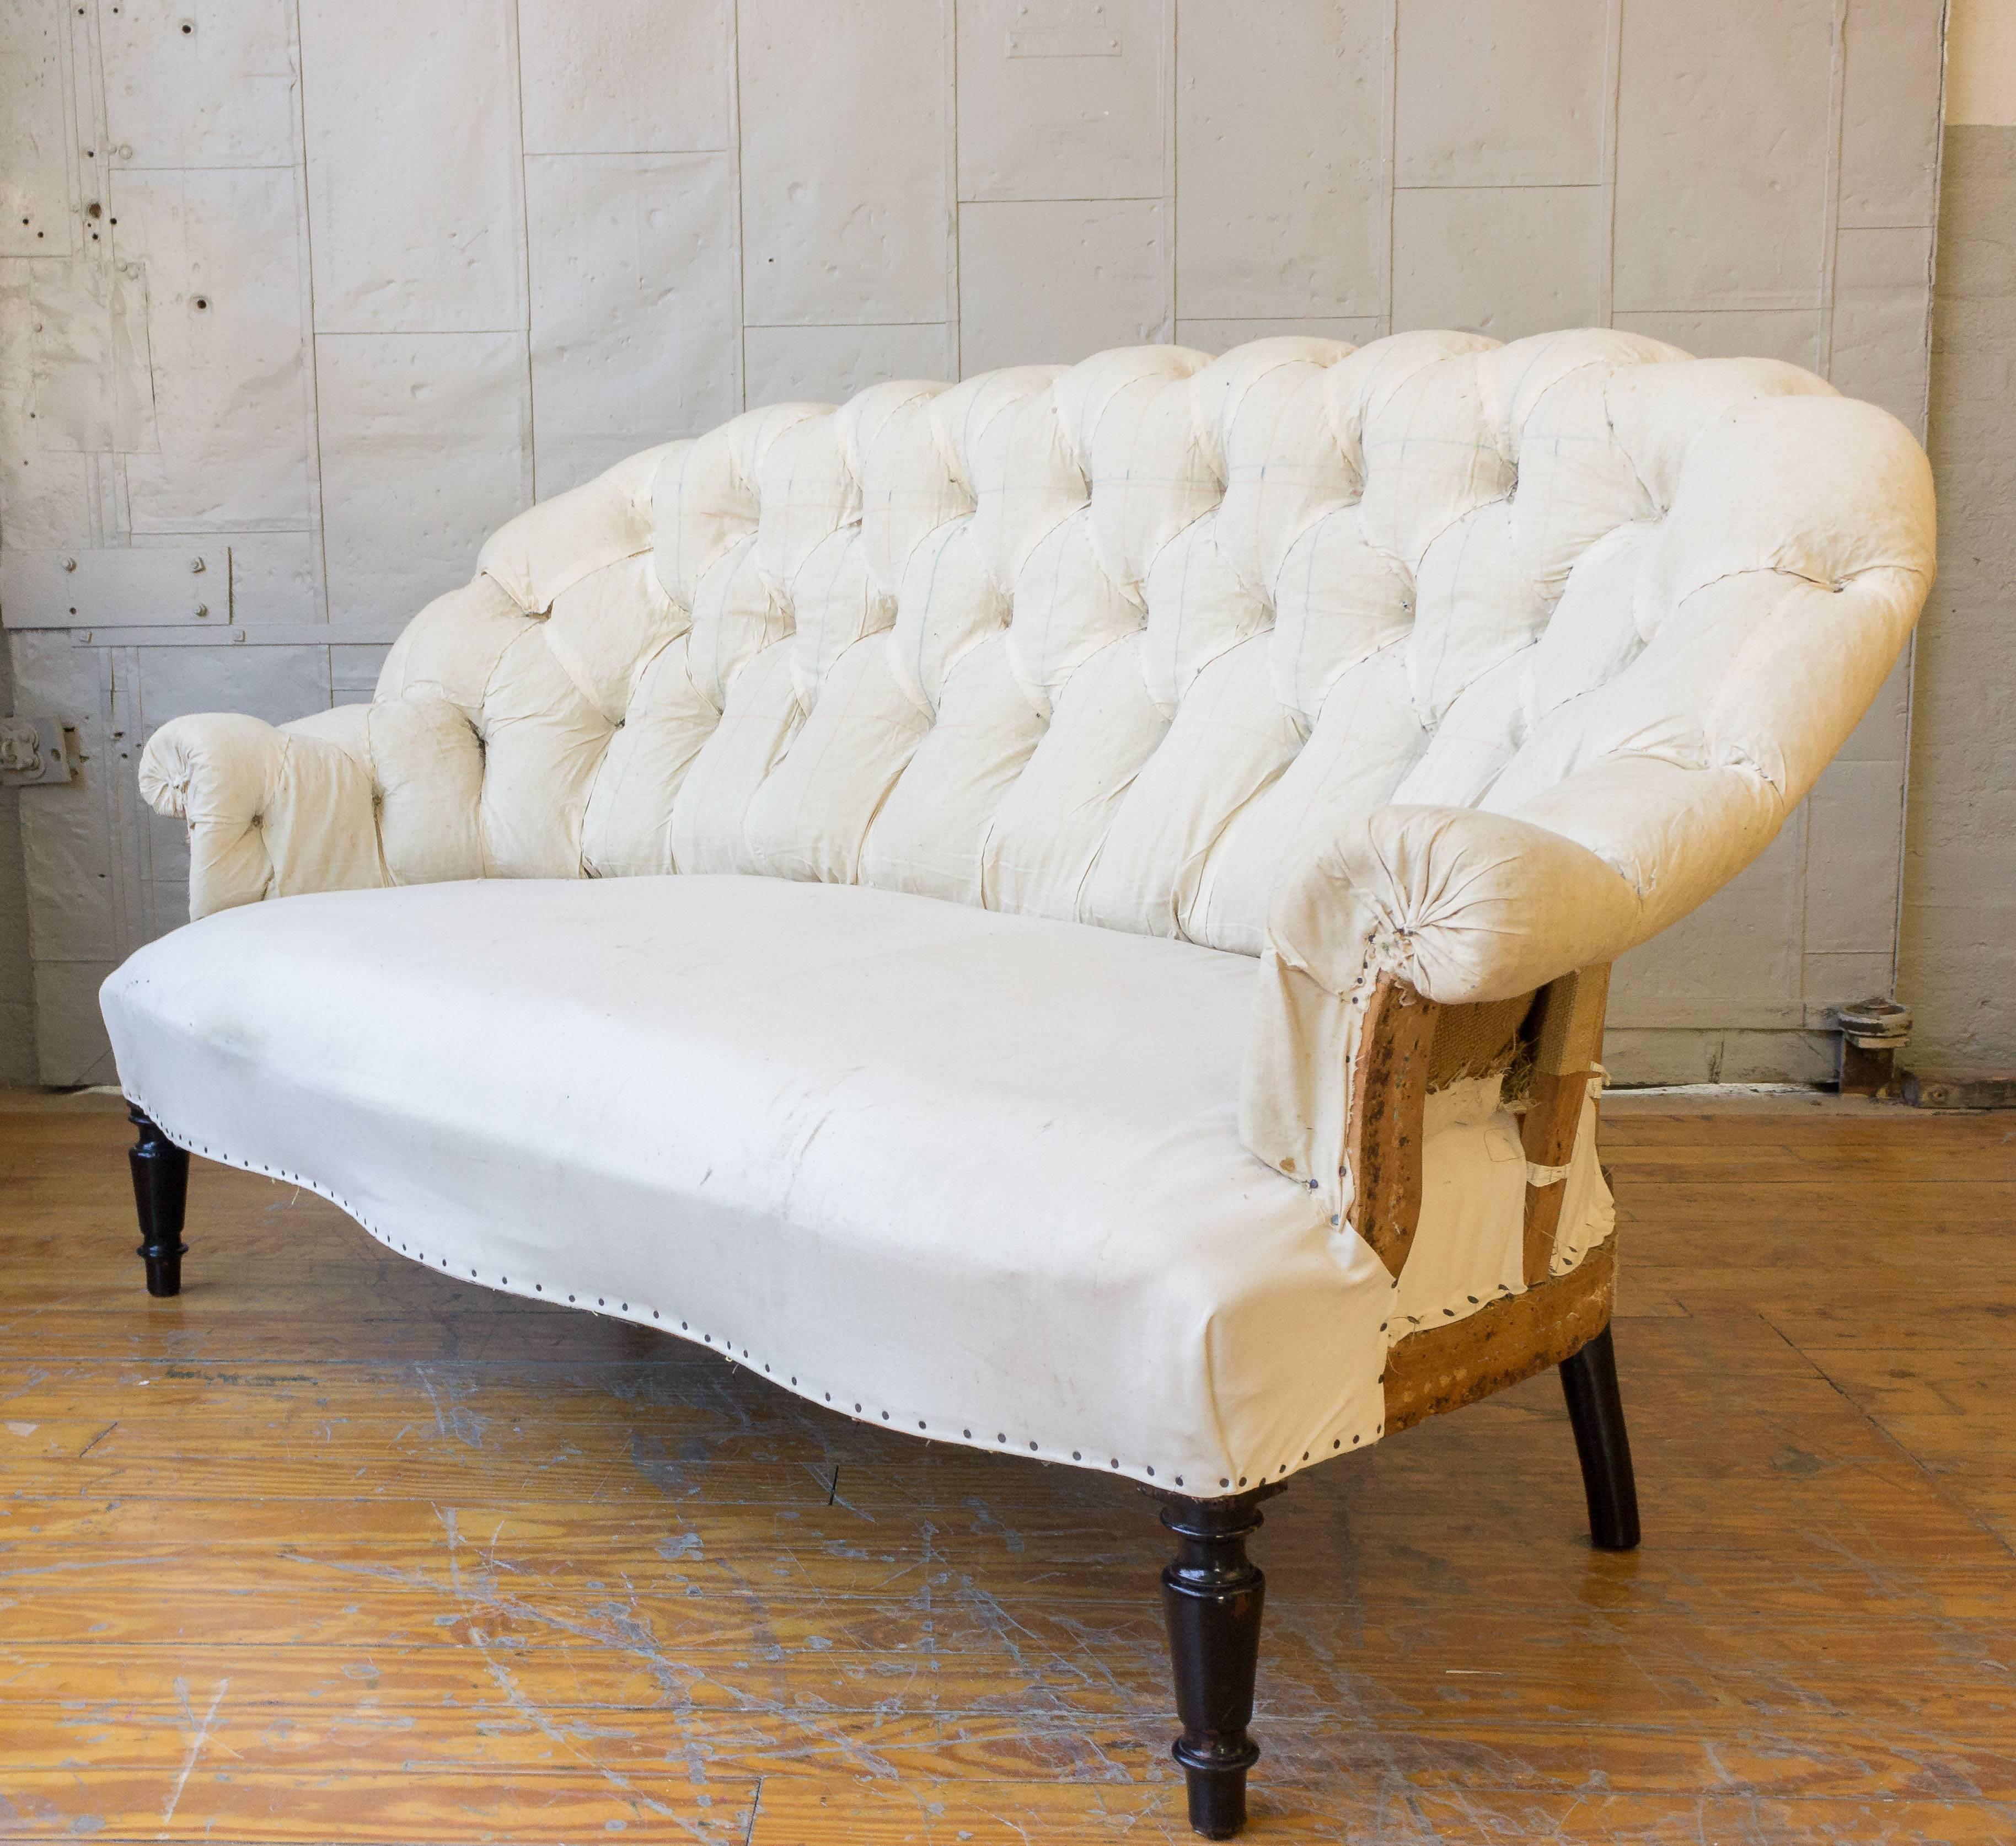 French Napoleon III period tufted settee in muslin. Legs and structure are in very good condition; settee is upholstery ready. Casters on front legs can be added upon request.



 